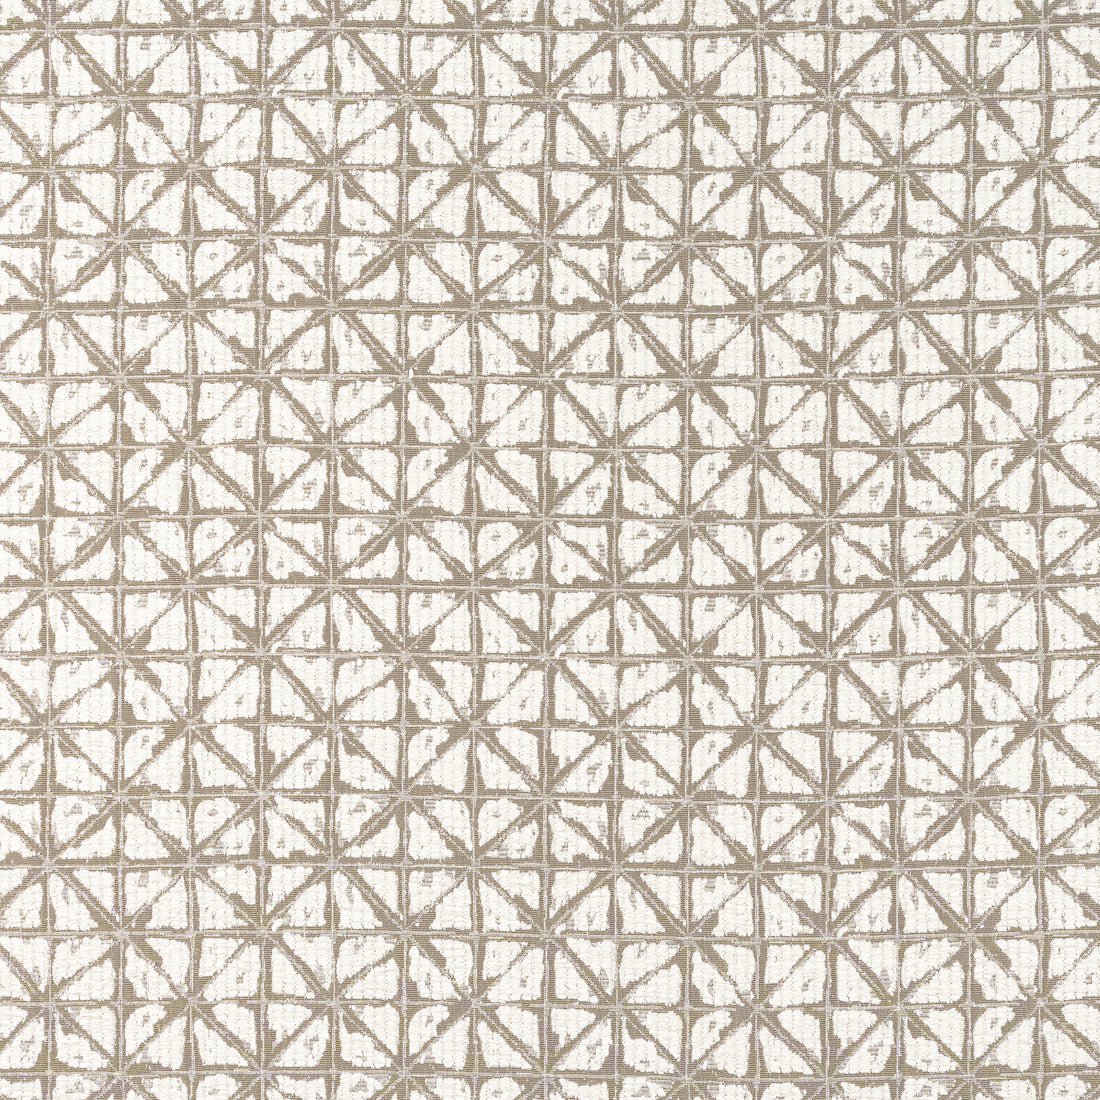 Soren fabric in mocha color - pattern number W8740 - by Thibaut in the Haven collection